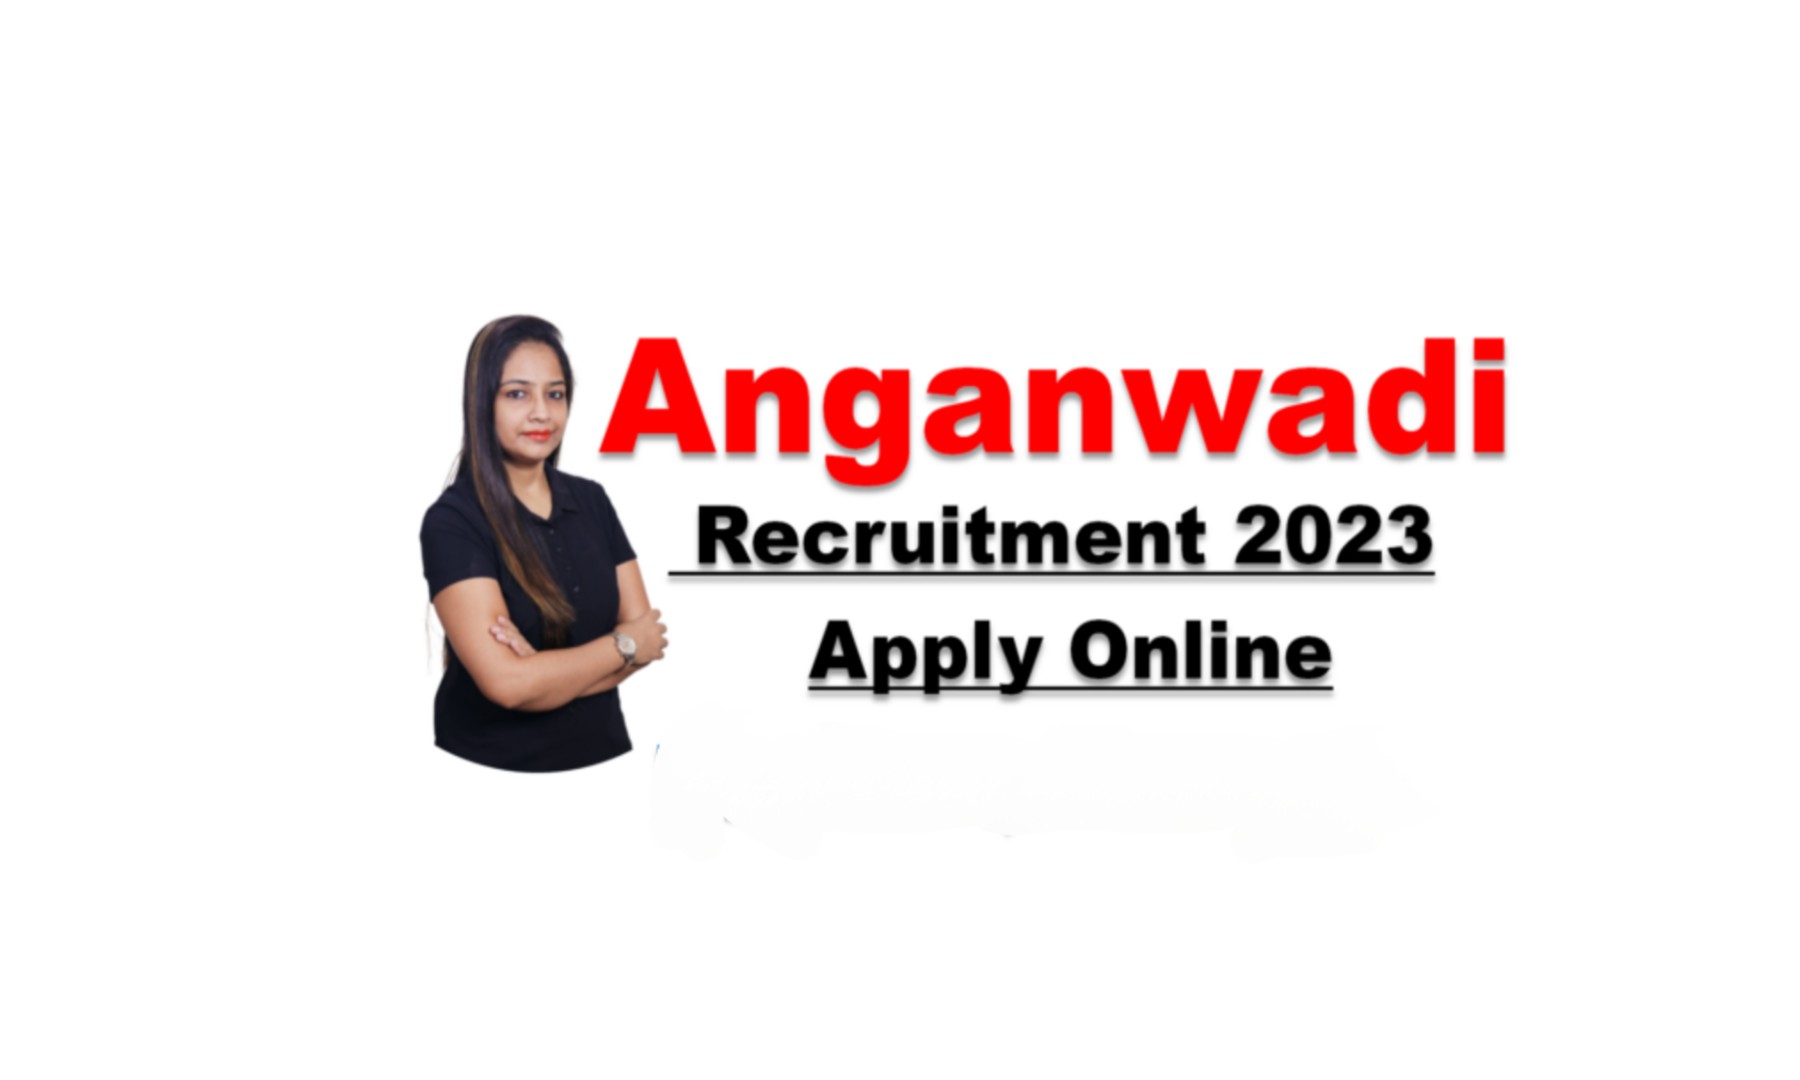 Anganwadi Recruitment 2023 Apply Online For 17000 Posts